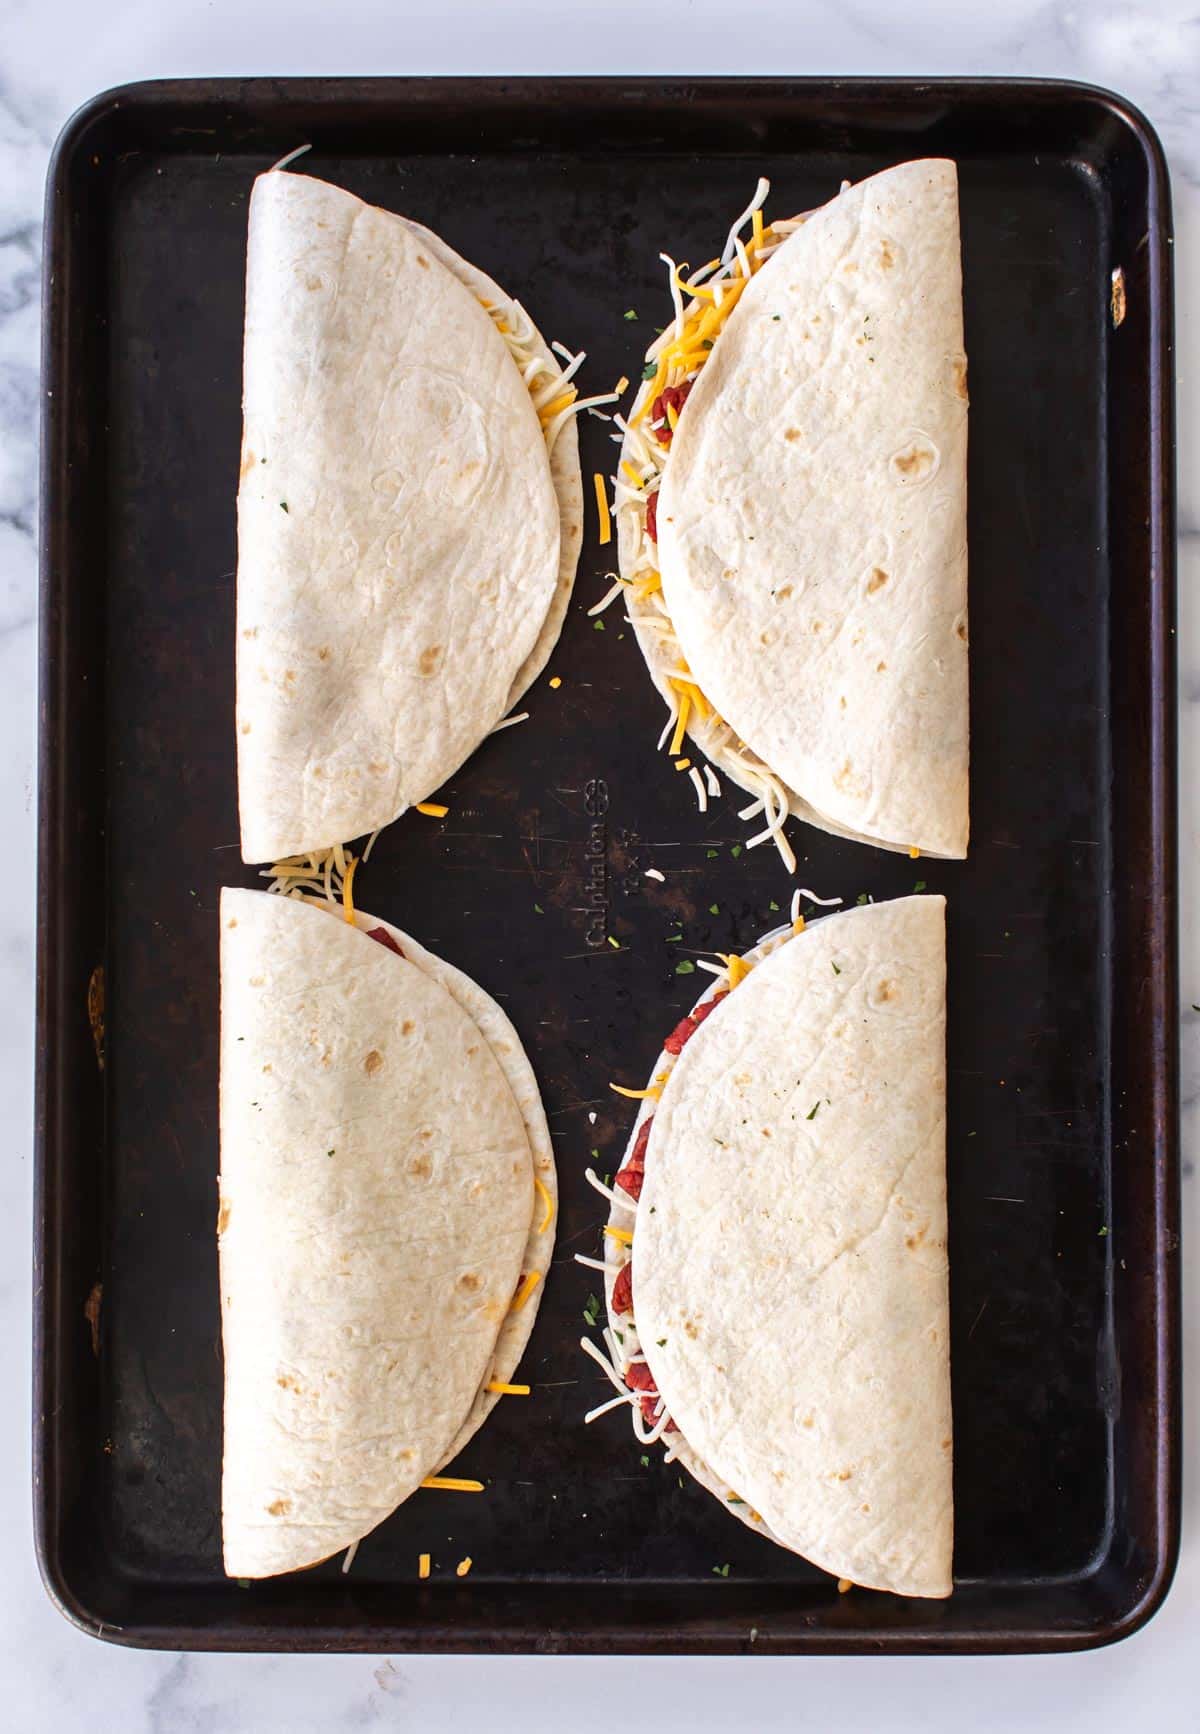 quesadillas on a sheet pan ready to be cooked.